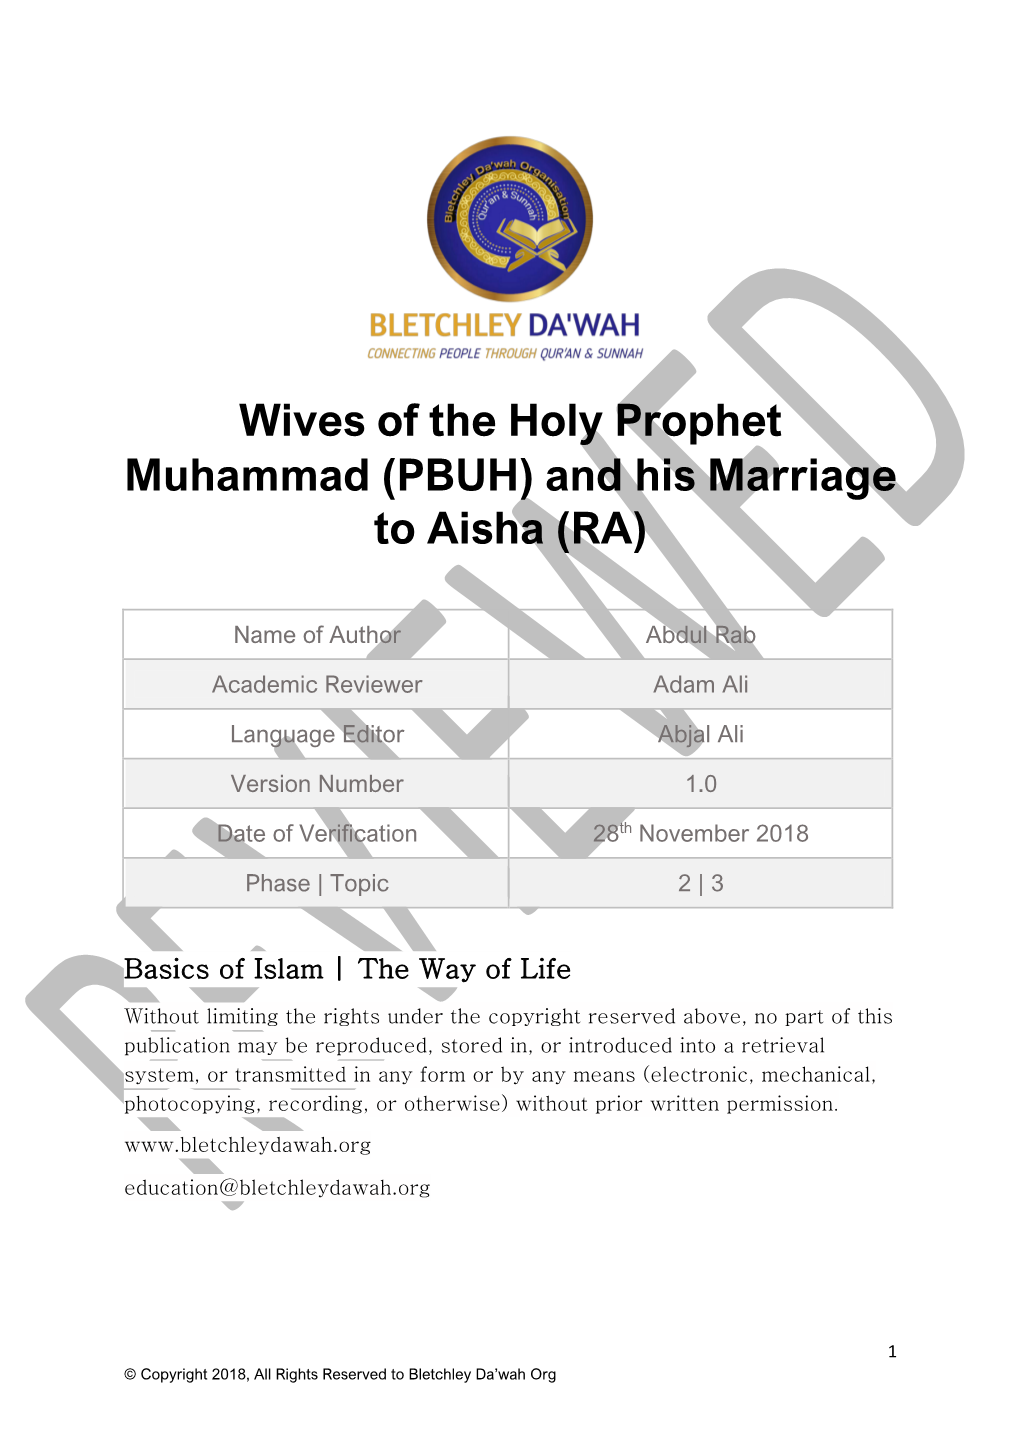 Wives of the Holy Prophet Muhammad (PBUH) and His Marriage to Aisha (RA)